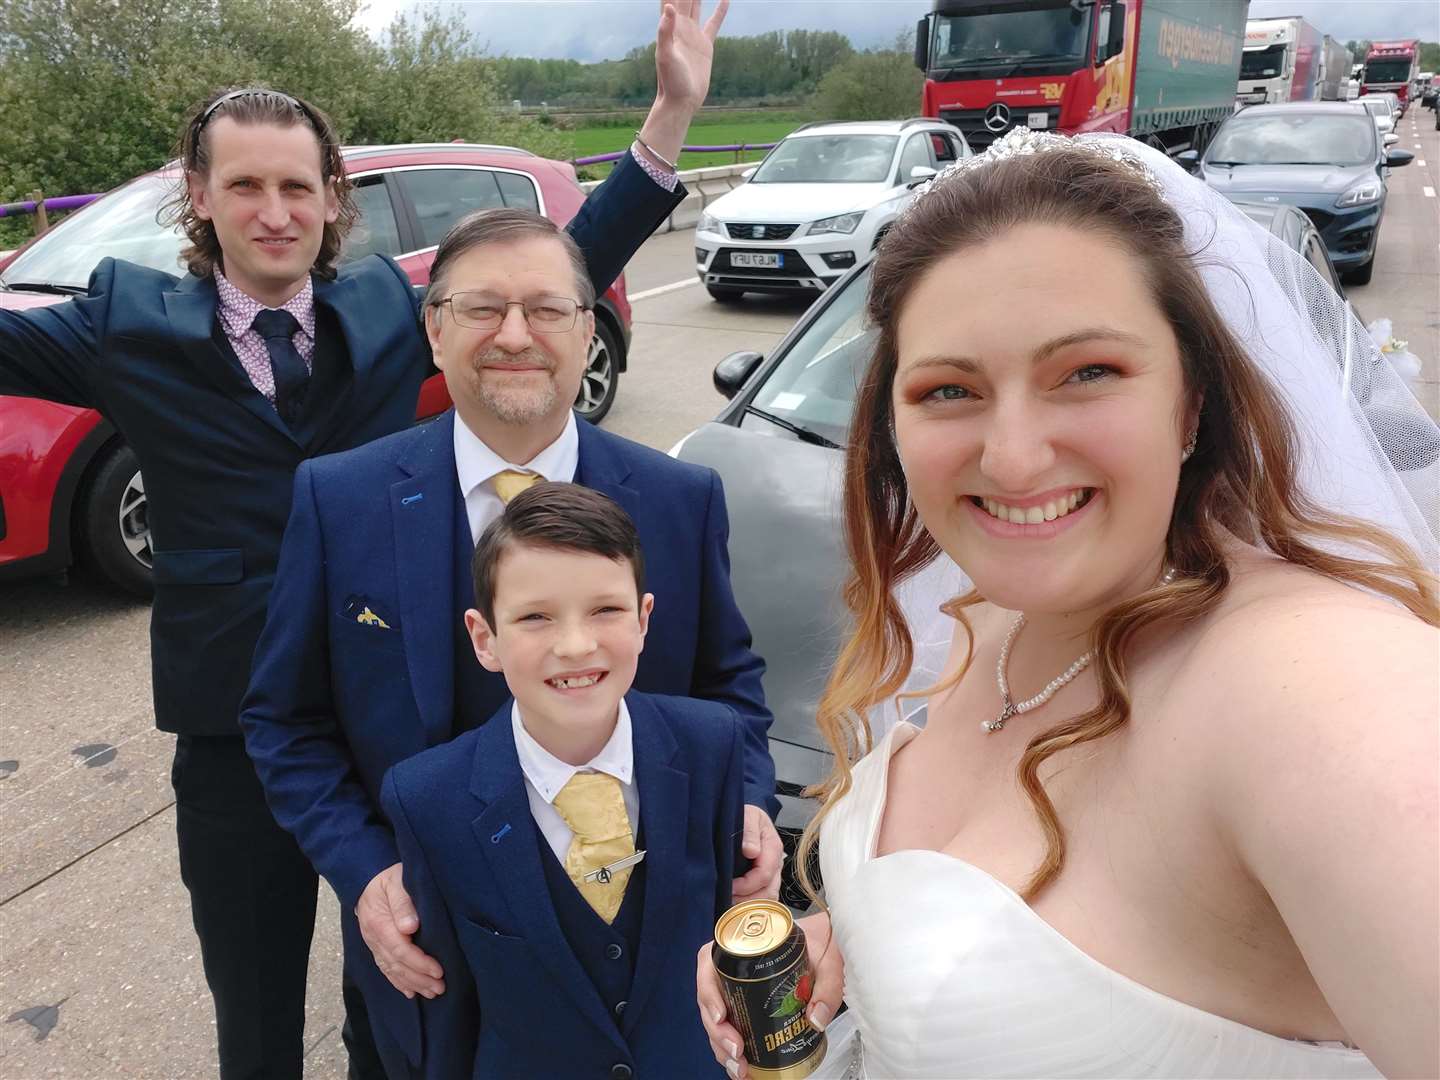 Mrs Luckhurst with page boy Joshua, dad Paul, and cousin Michael on the M20 (47502483)